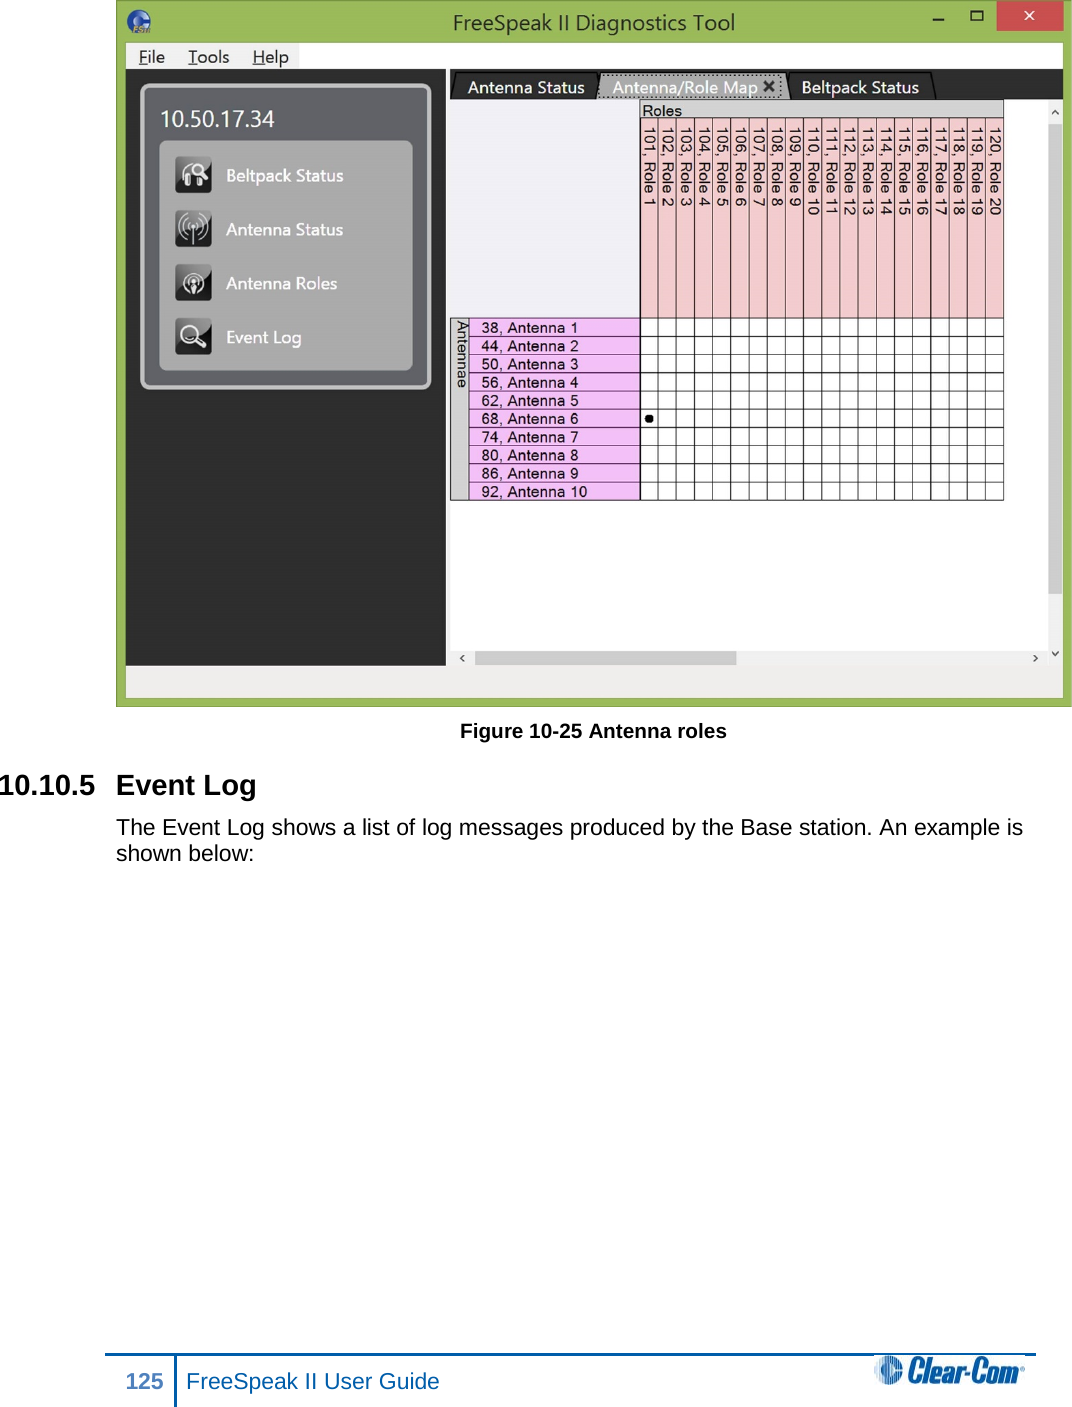  Figure 10-25 Antenna roles 10.10.5 Event Log The Event Log shows a list of log messages produced by the Base station. An example is shown below: 125 FreeSpeak II User Guide  